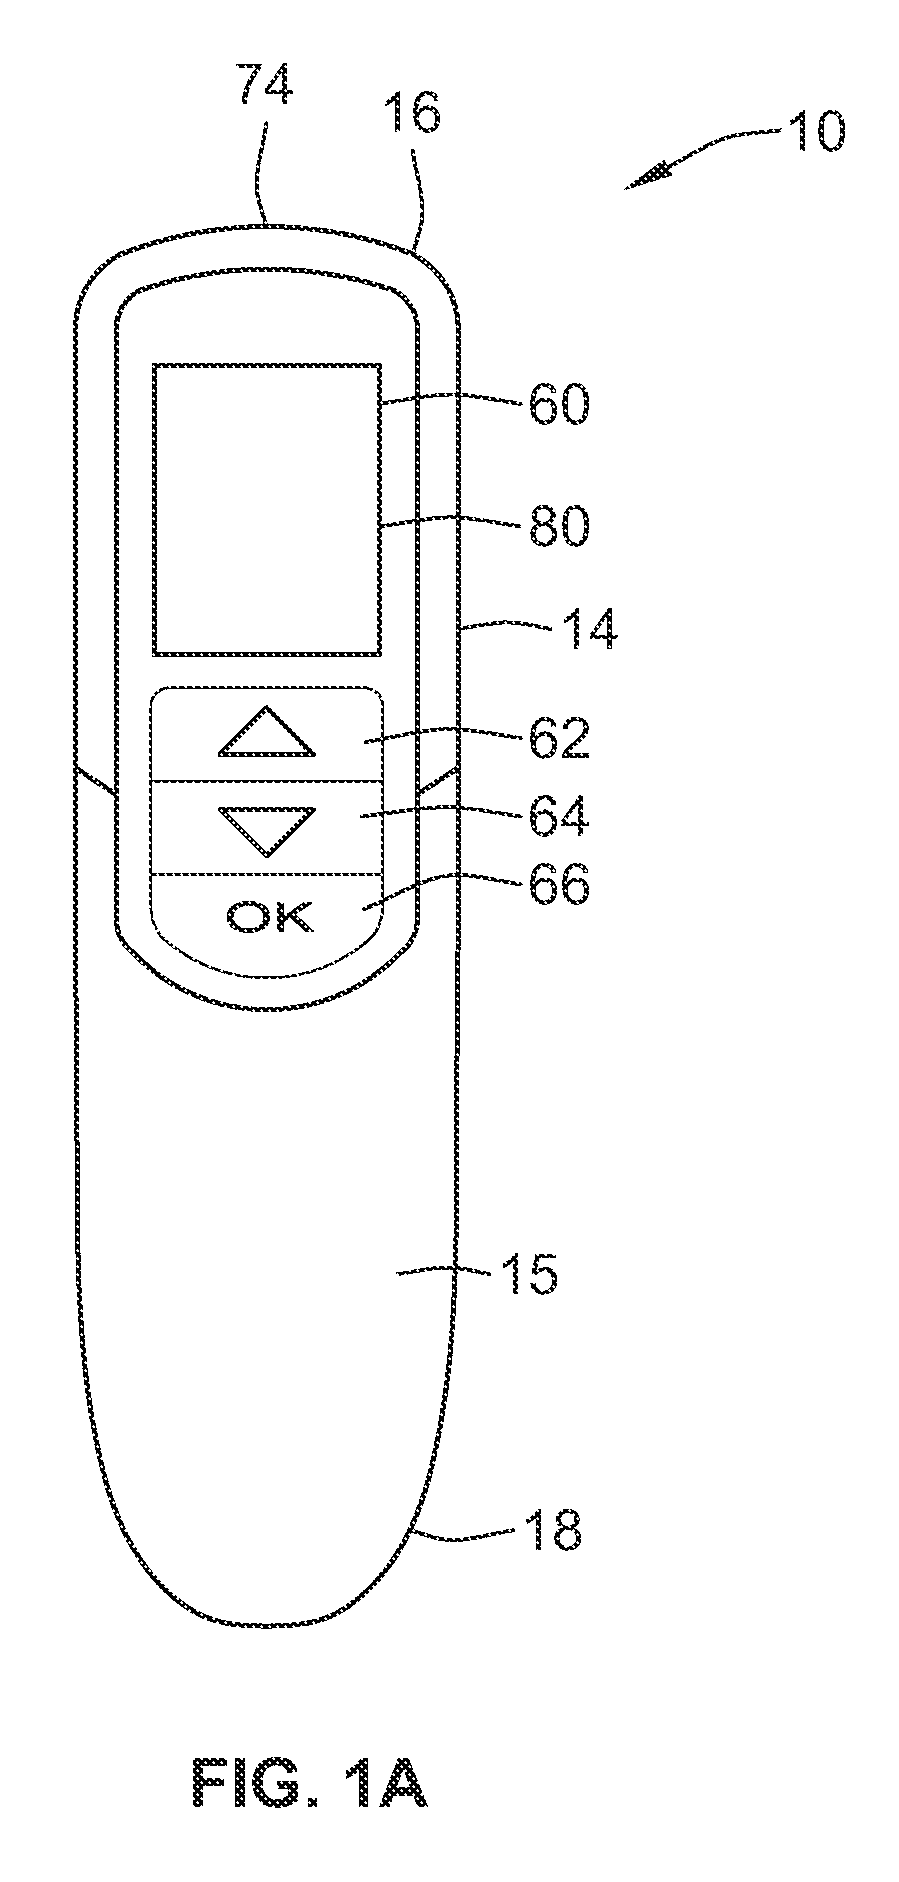 Electro-mechanical drug delivery device